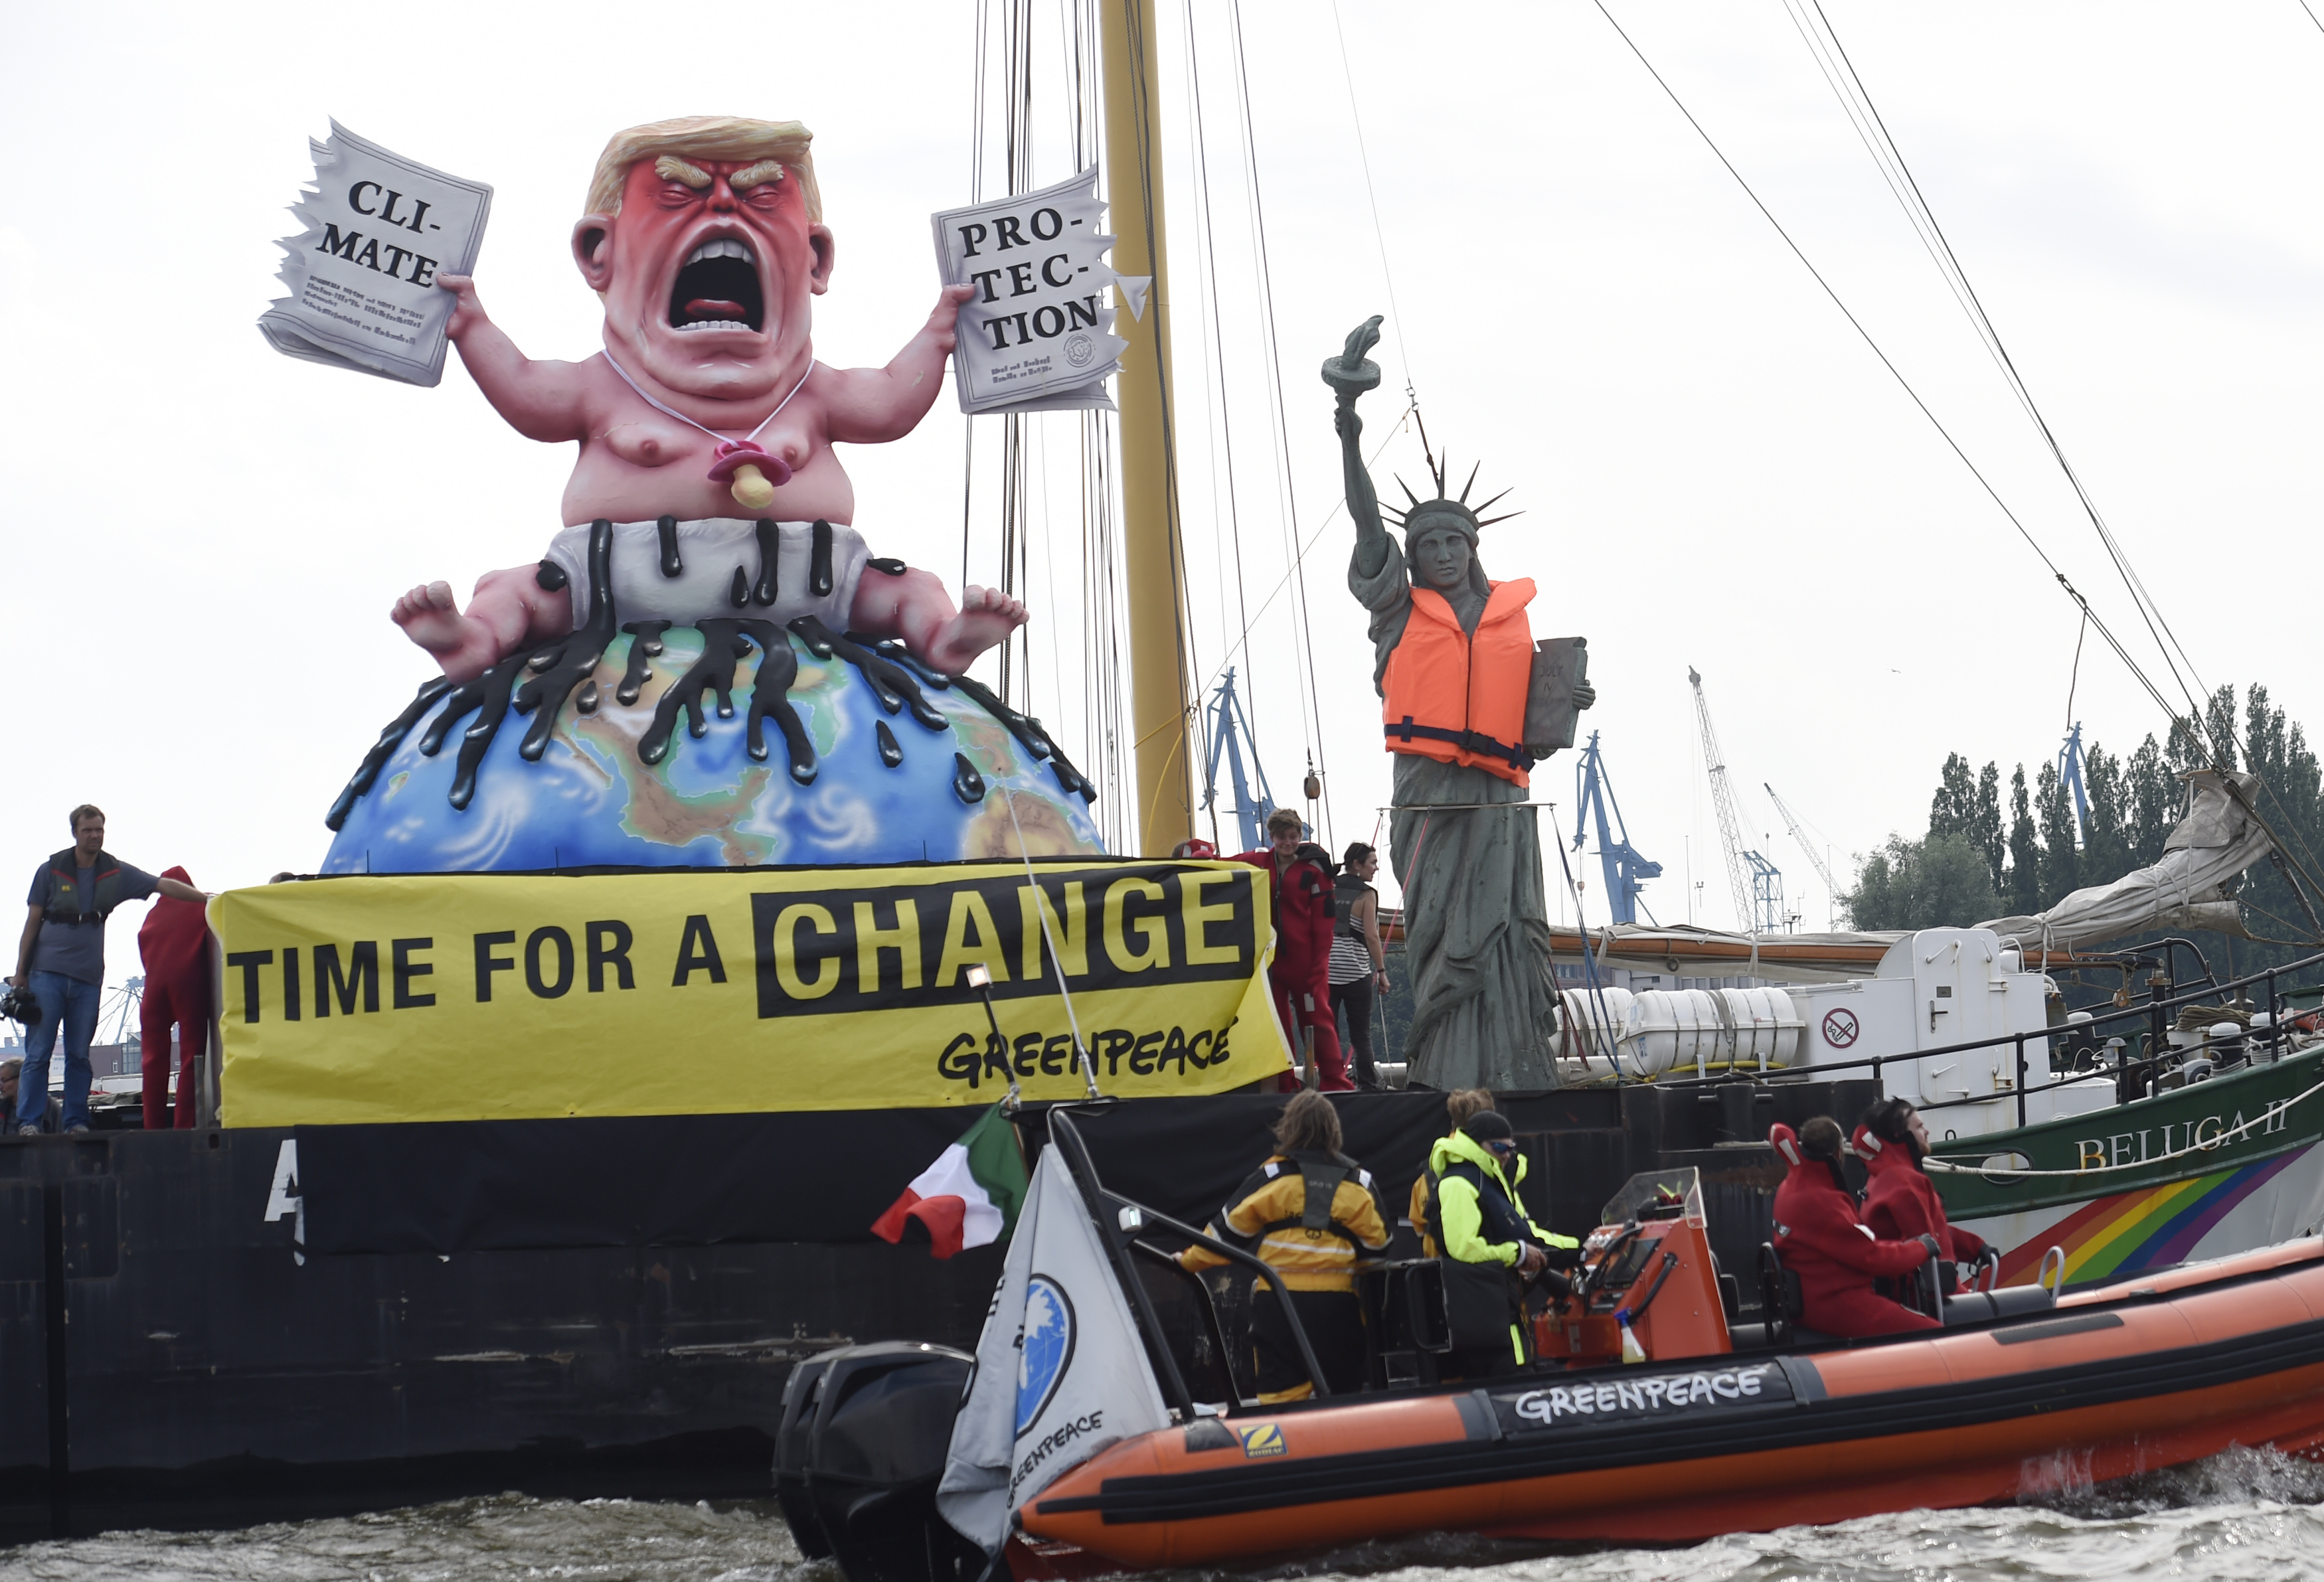 Greenpeace activists stay next to the giant statues depicting U.S. President Trump and Statue of Liberty during the protest at the G20 summit in Hamburg